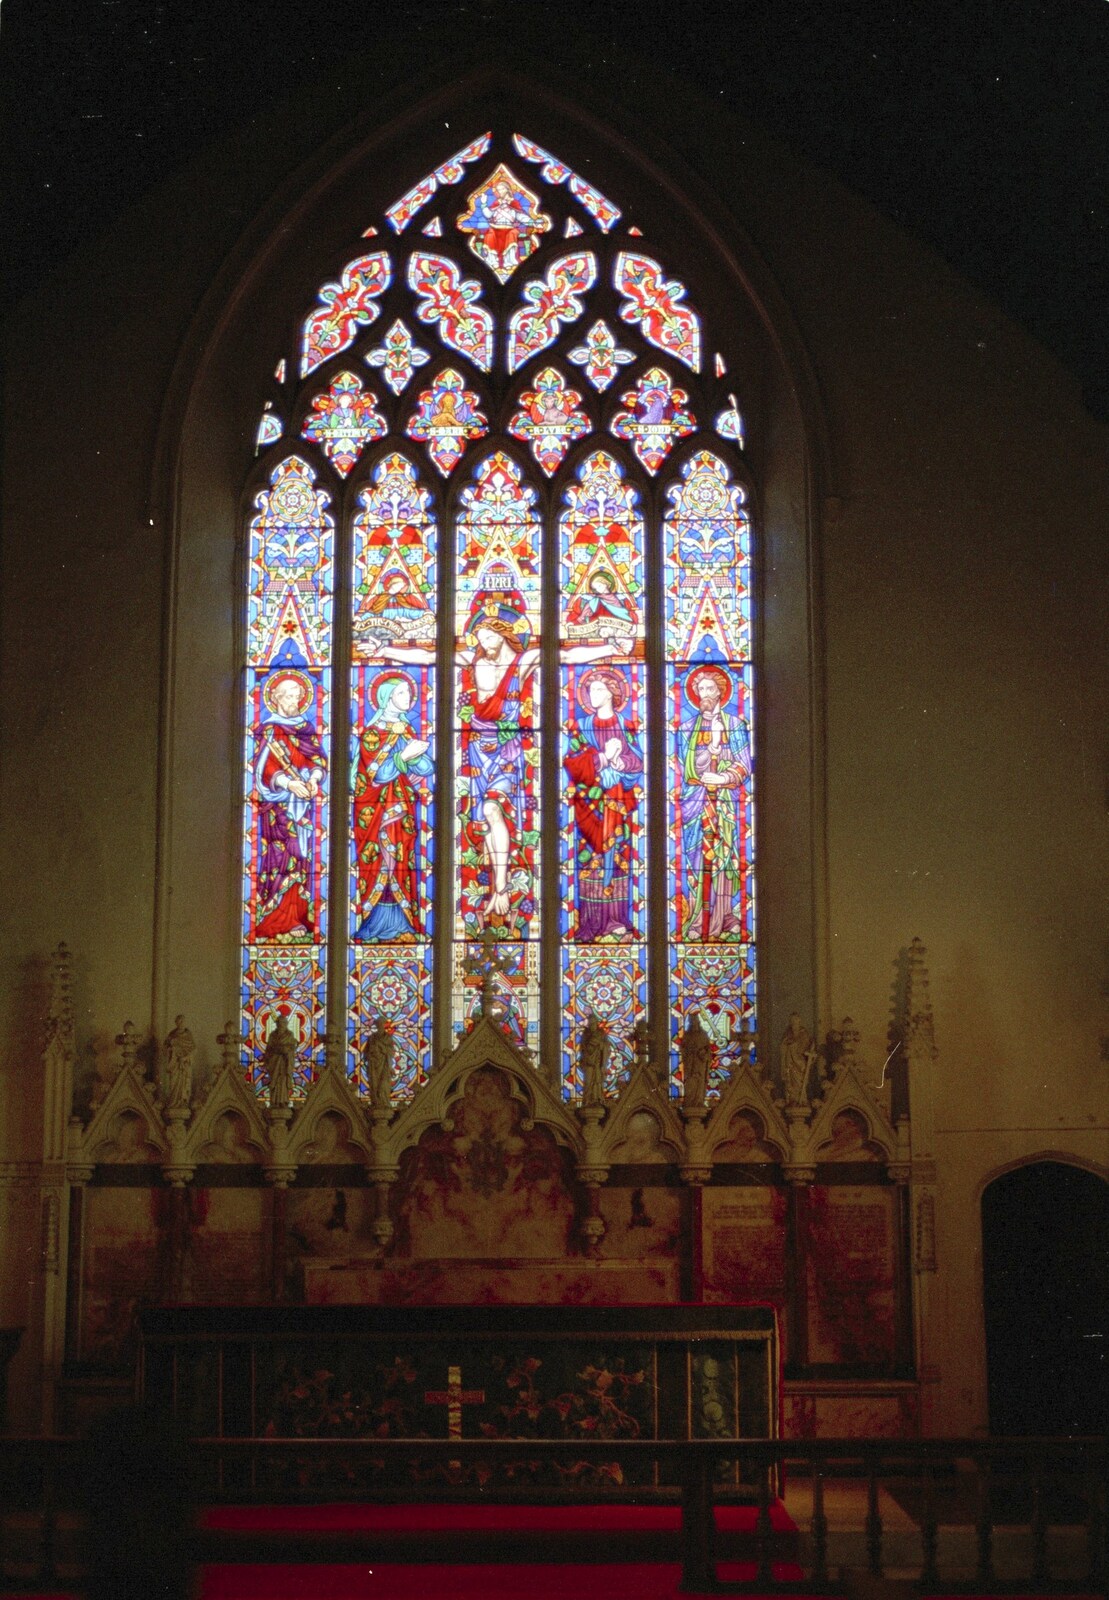 Stained glass in Lavenham church from Mother and Mike Visit, Lavenham, Suffolk - 14th April 1996